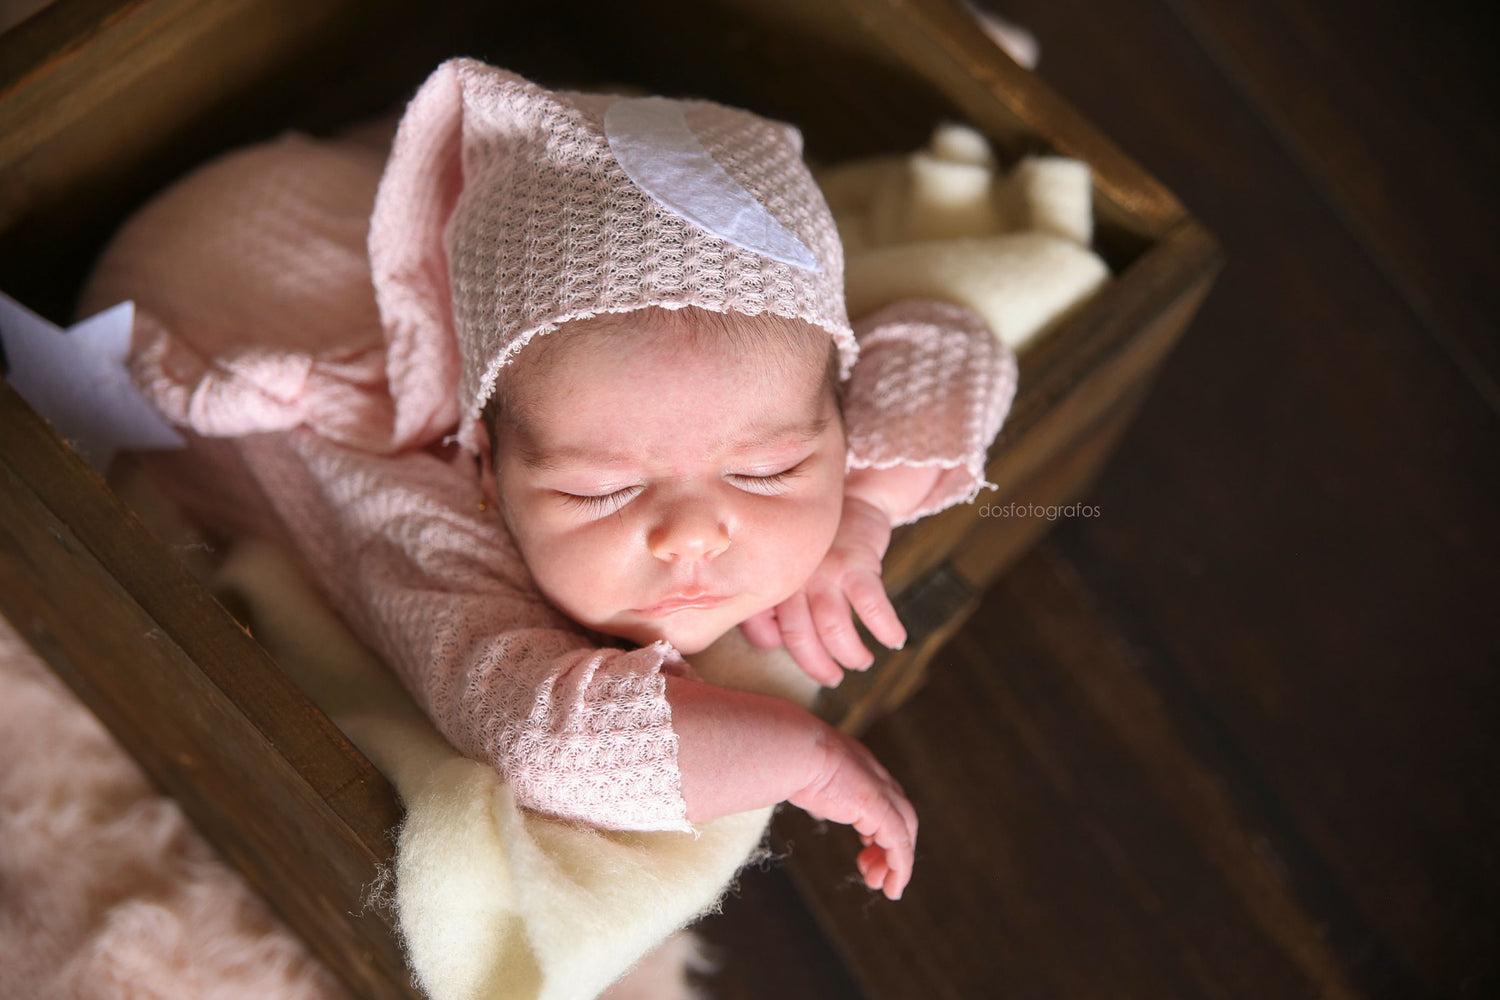 Baby wearing Pink waffle fabric footed pajamas and matching hat with moon and stars, displayed as a newborn photography prop on a rustic wooden surface.